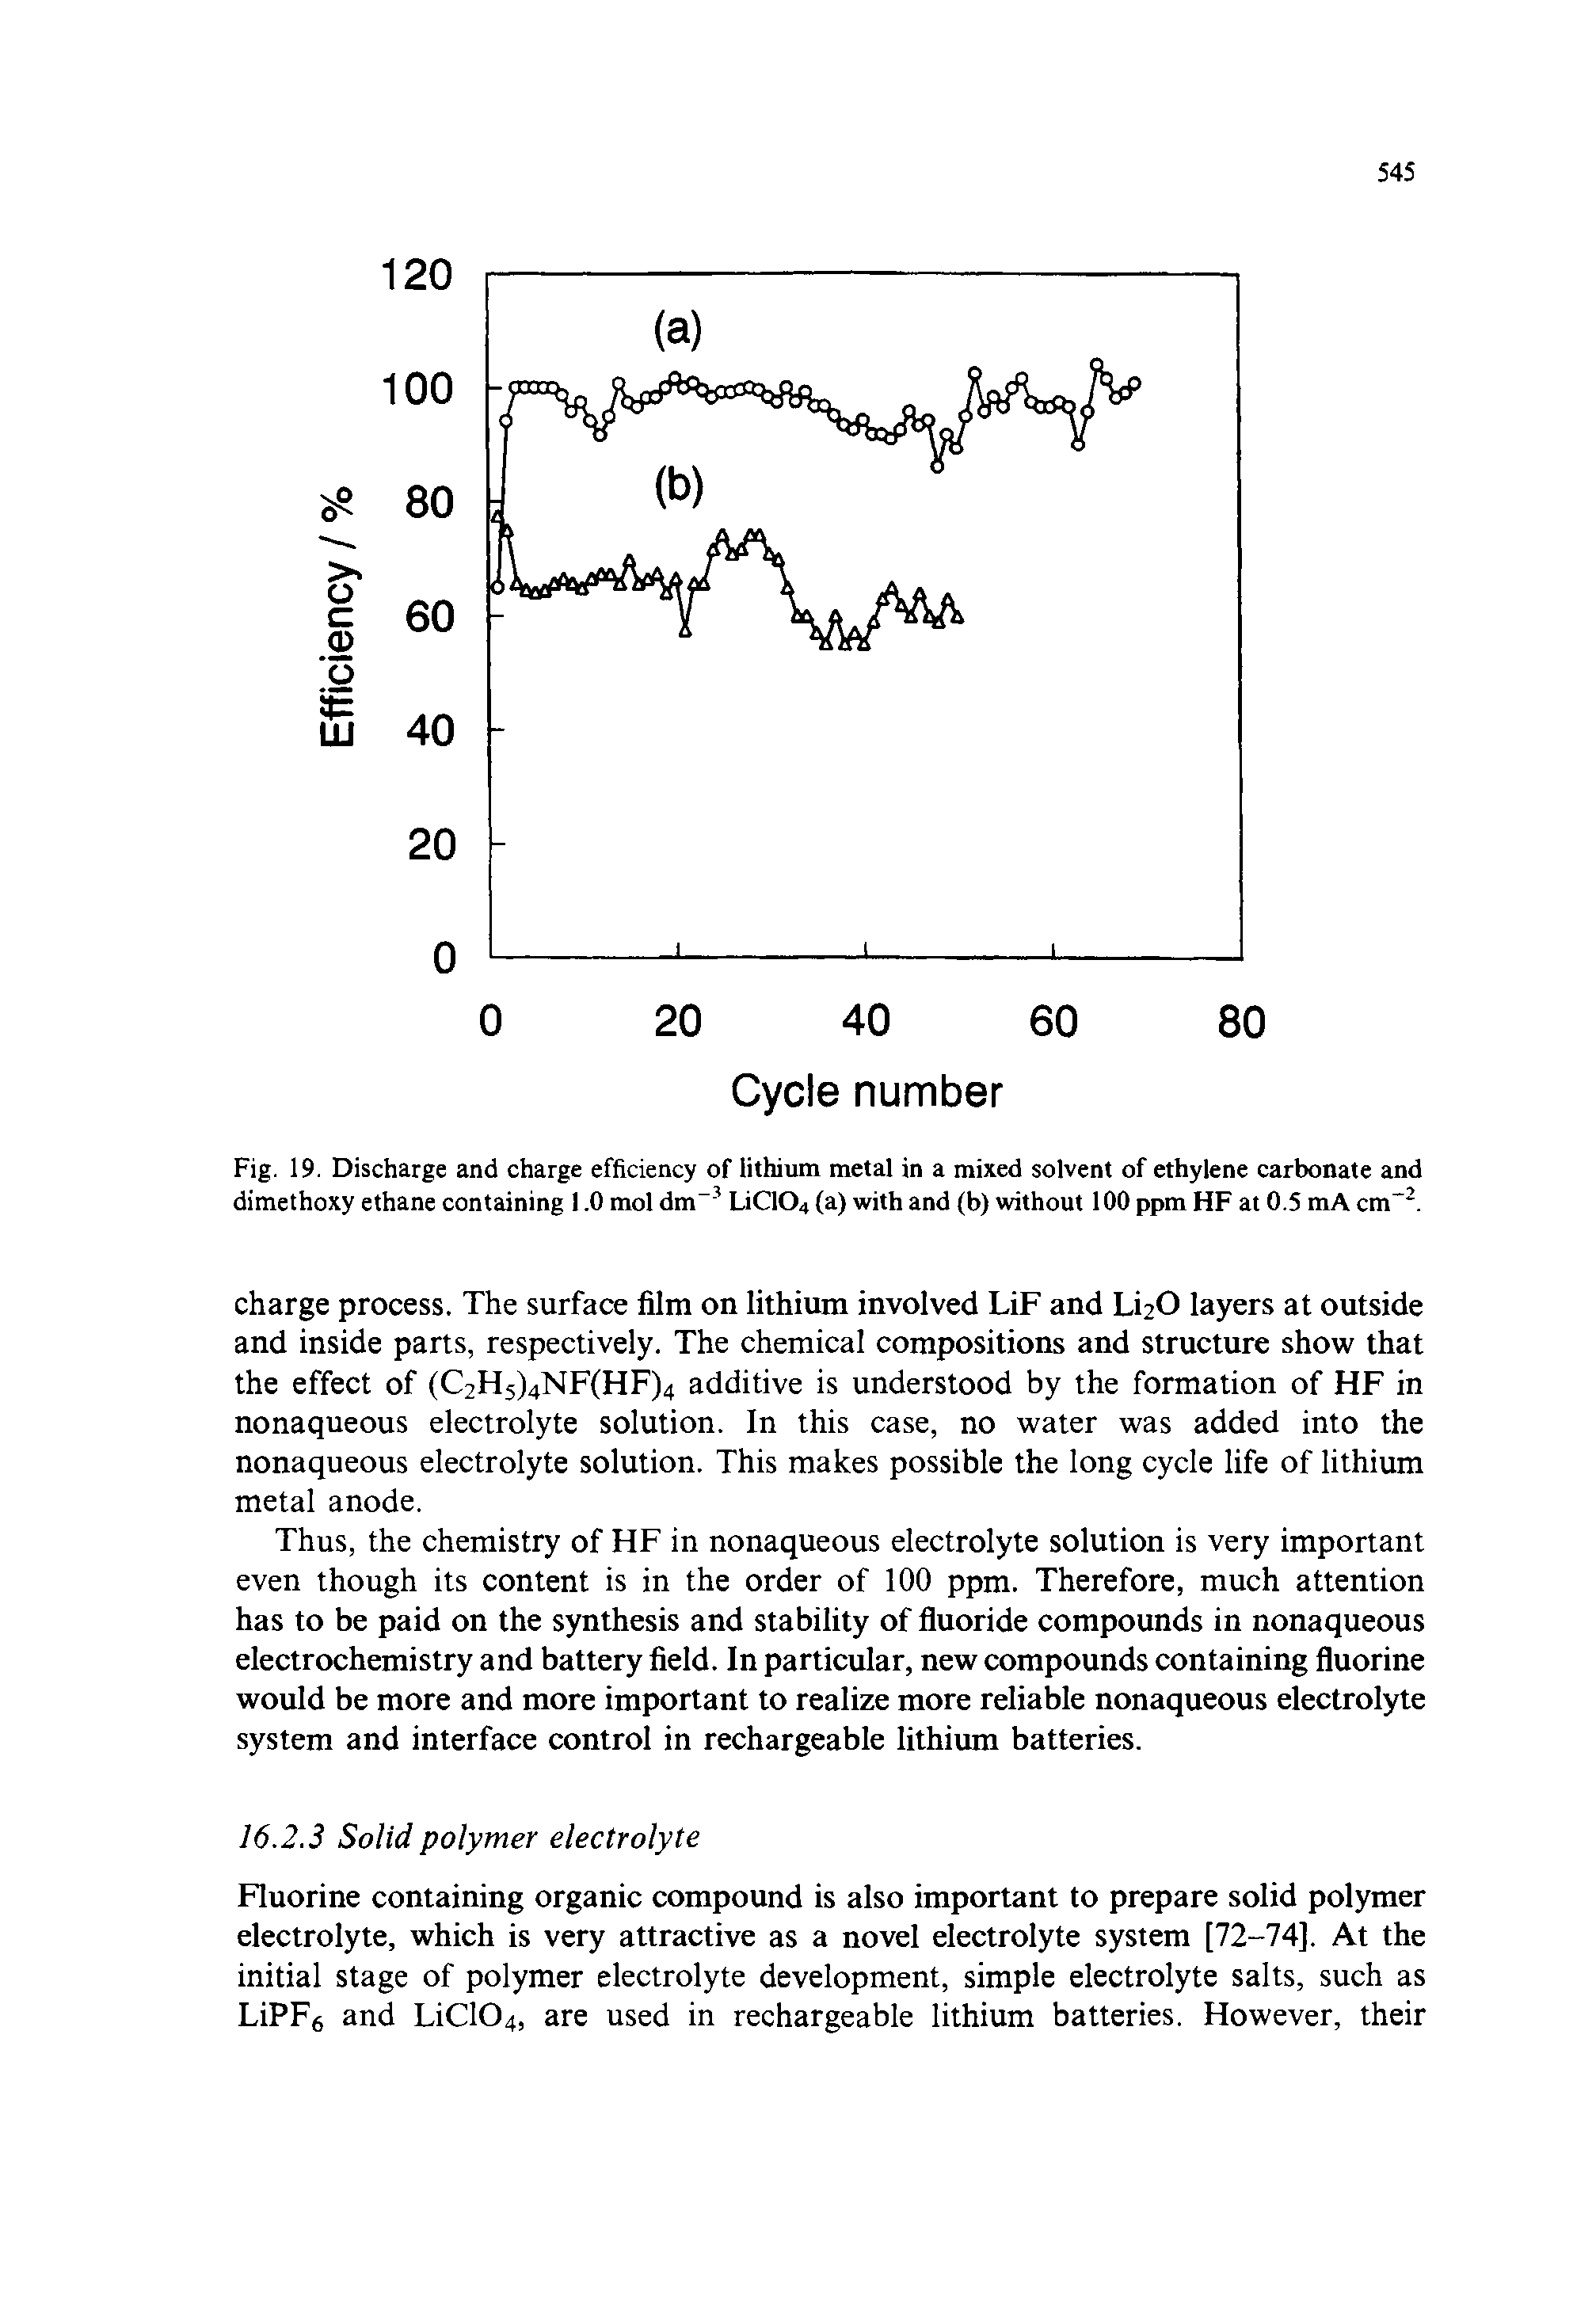 Fig. 19. Discharge and charge efficiency of lithium metal in a mixed solvent of ethylene carbonate and dimethoxy ethane containing 1.0 mol dm-3 LiC104 (a) with and (b) without 100 ppm HF at 0.5 mA cm-2.